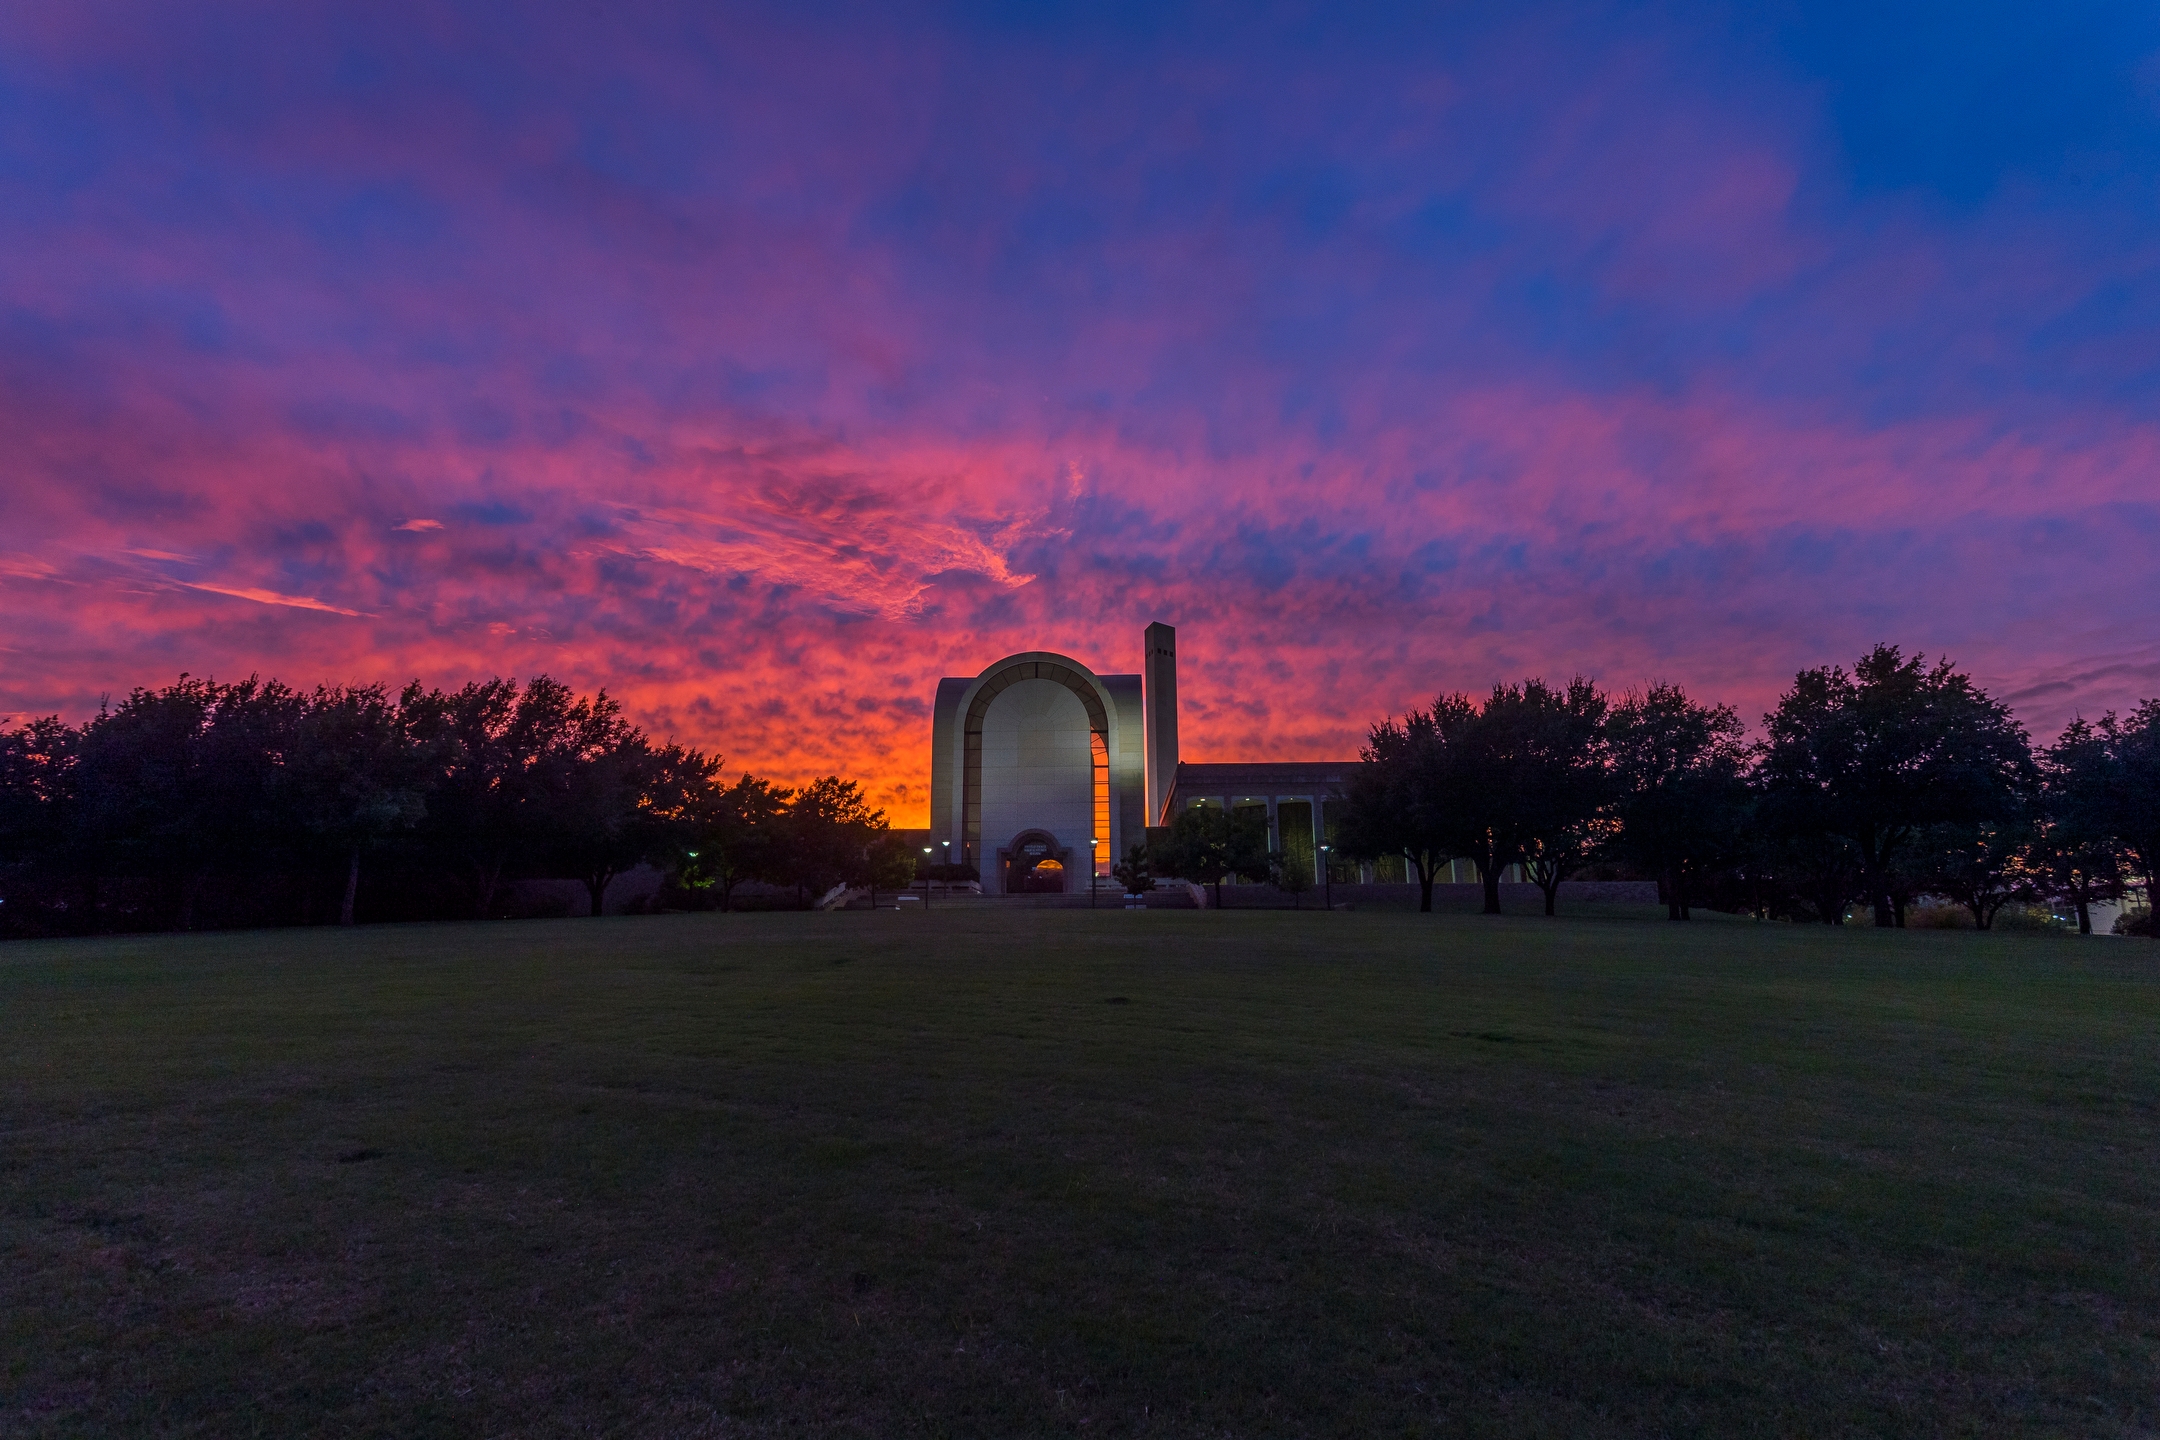 A sunset view at ACU